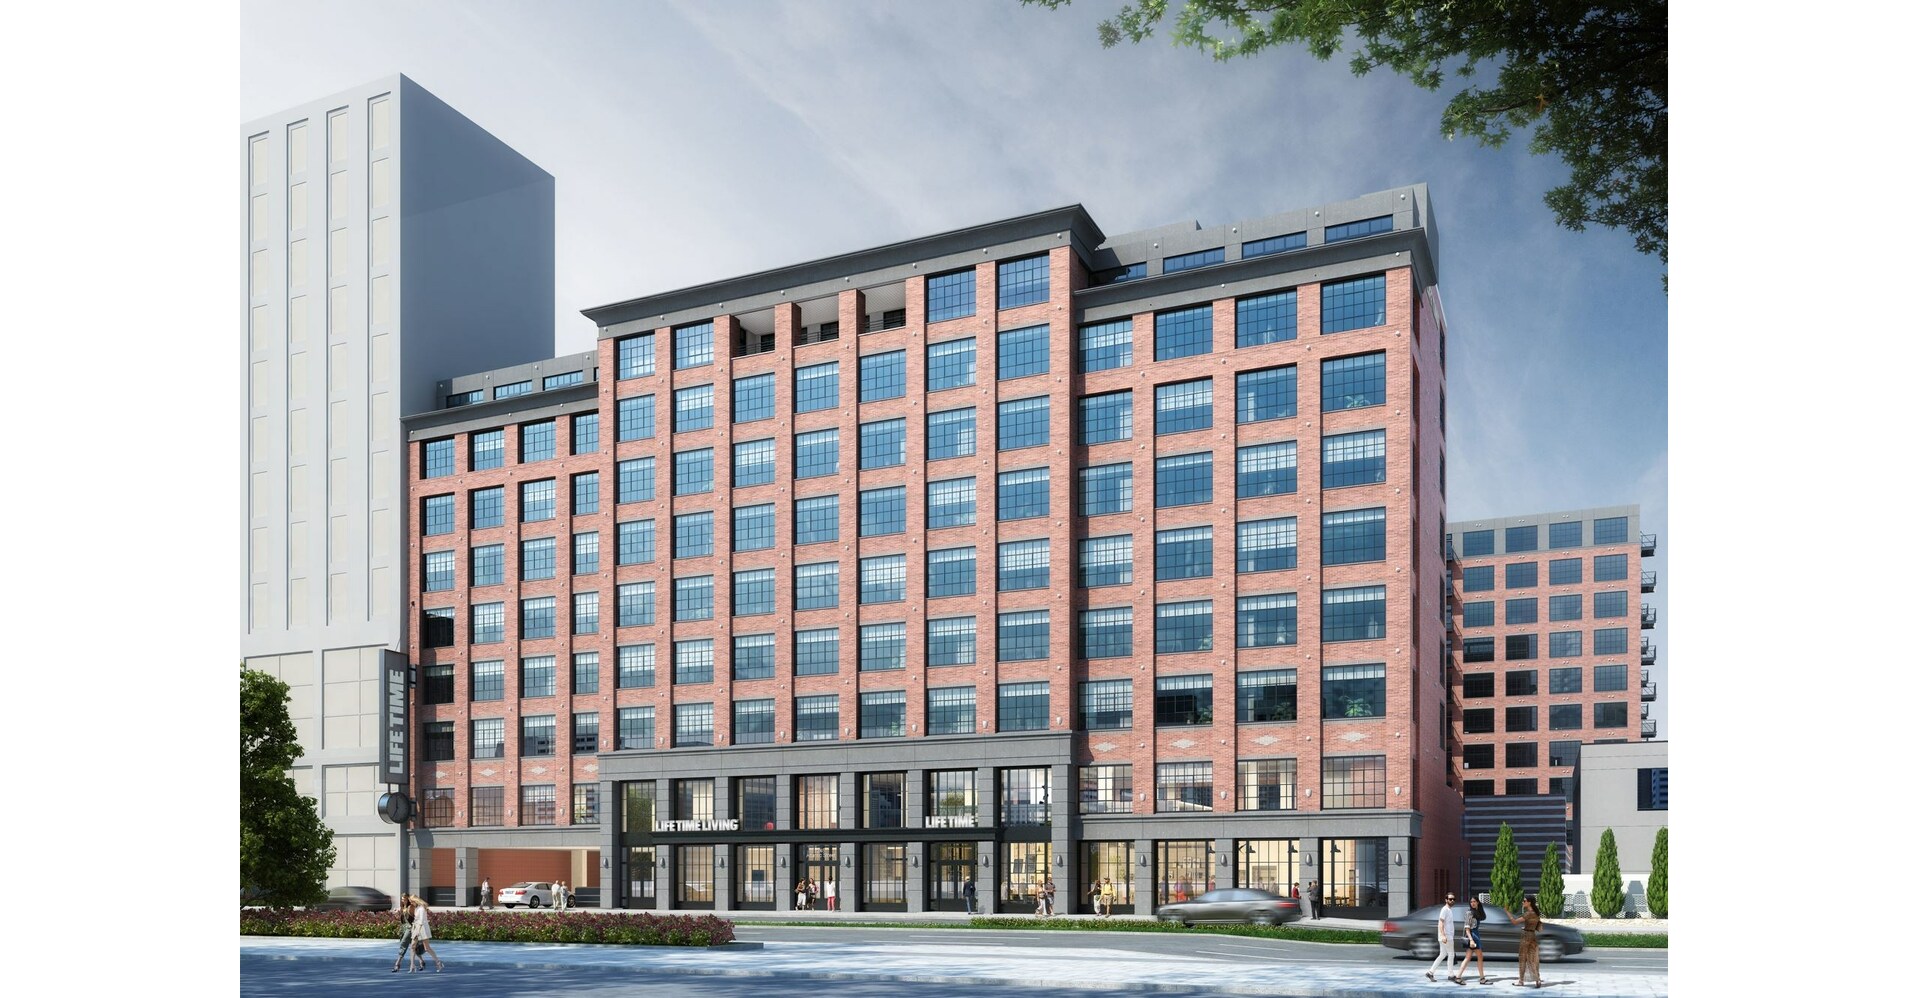 Lifestyle and Fitness Leader, Life Time, to Bring Athletic Club and Luxury Residences to Downtown Stamford, CT in Mid-2023